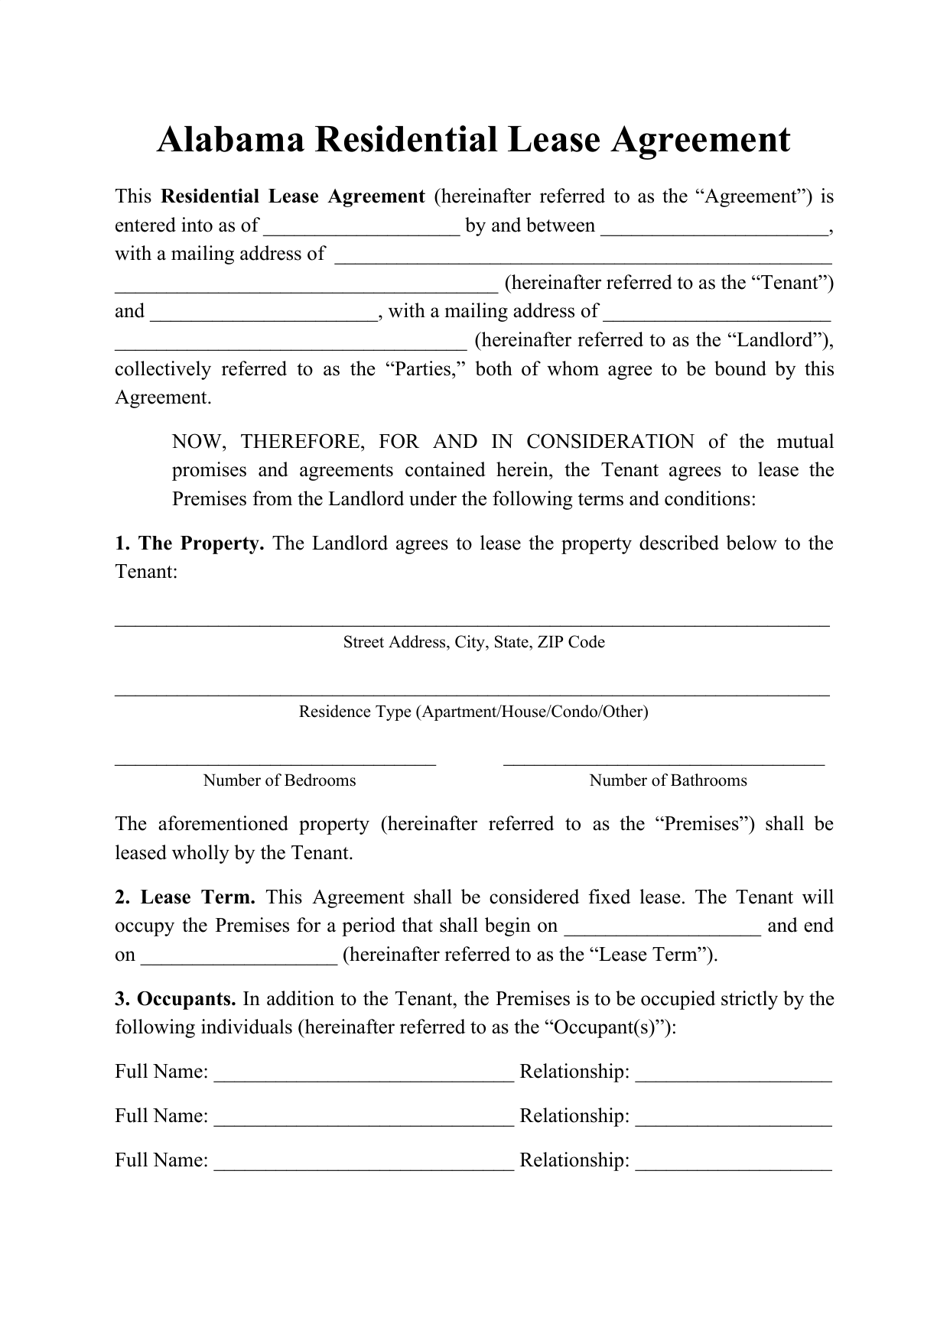 alabama-residential-lease-agreement-template-fill-out-sign-online-and-download-pdf